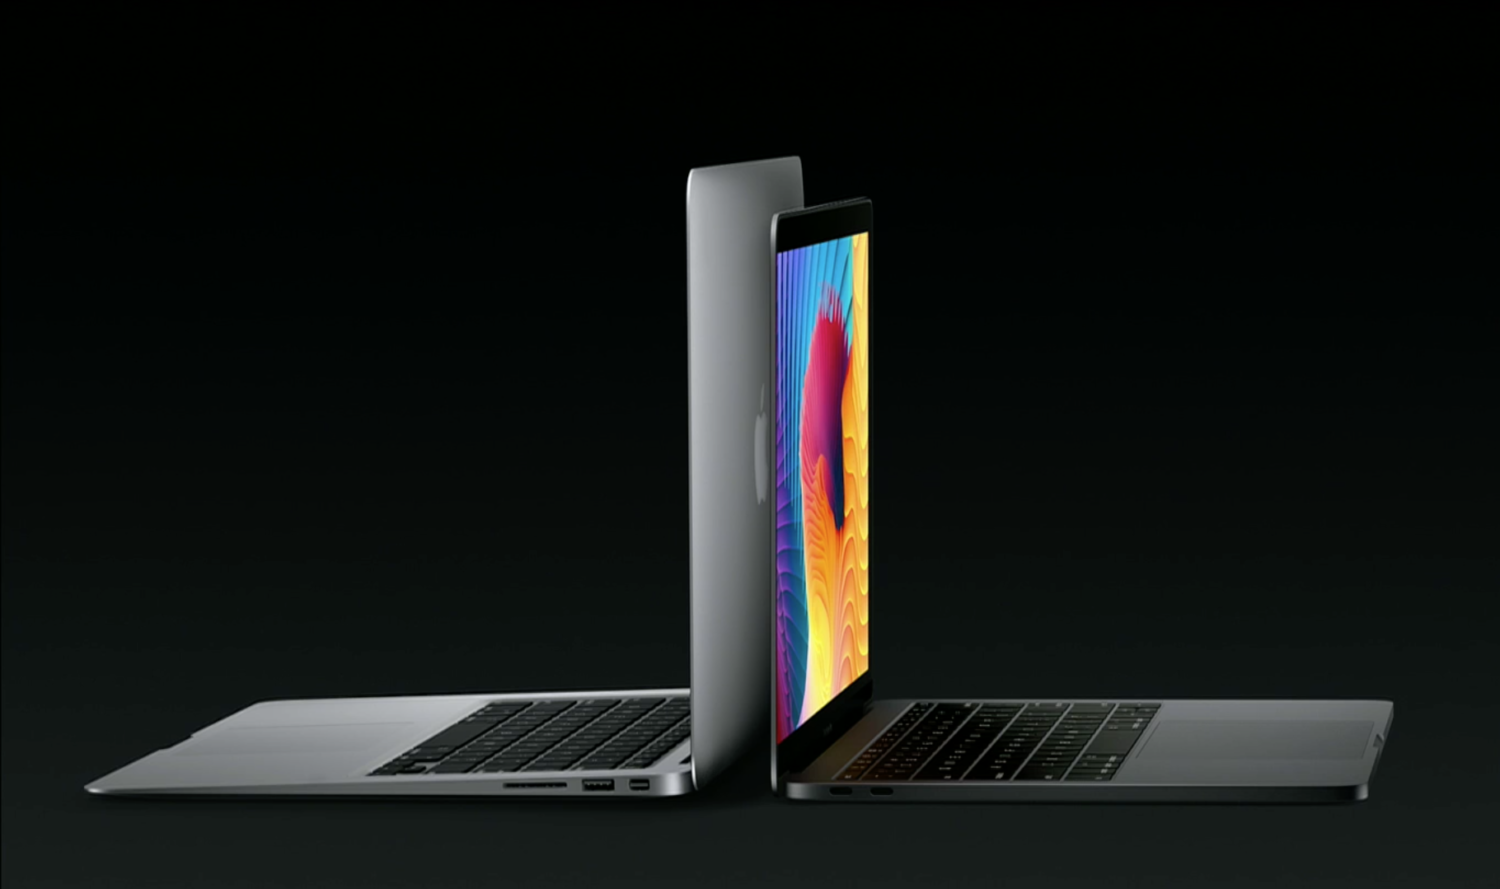 MacBook Pro 13 is smaller and thinner than MacBook Air